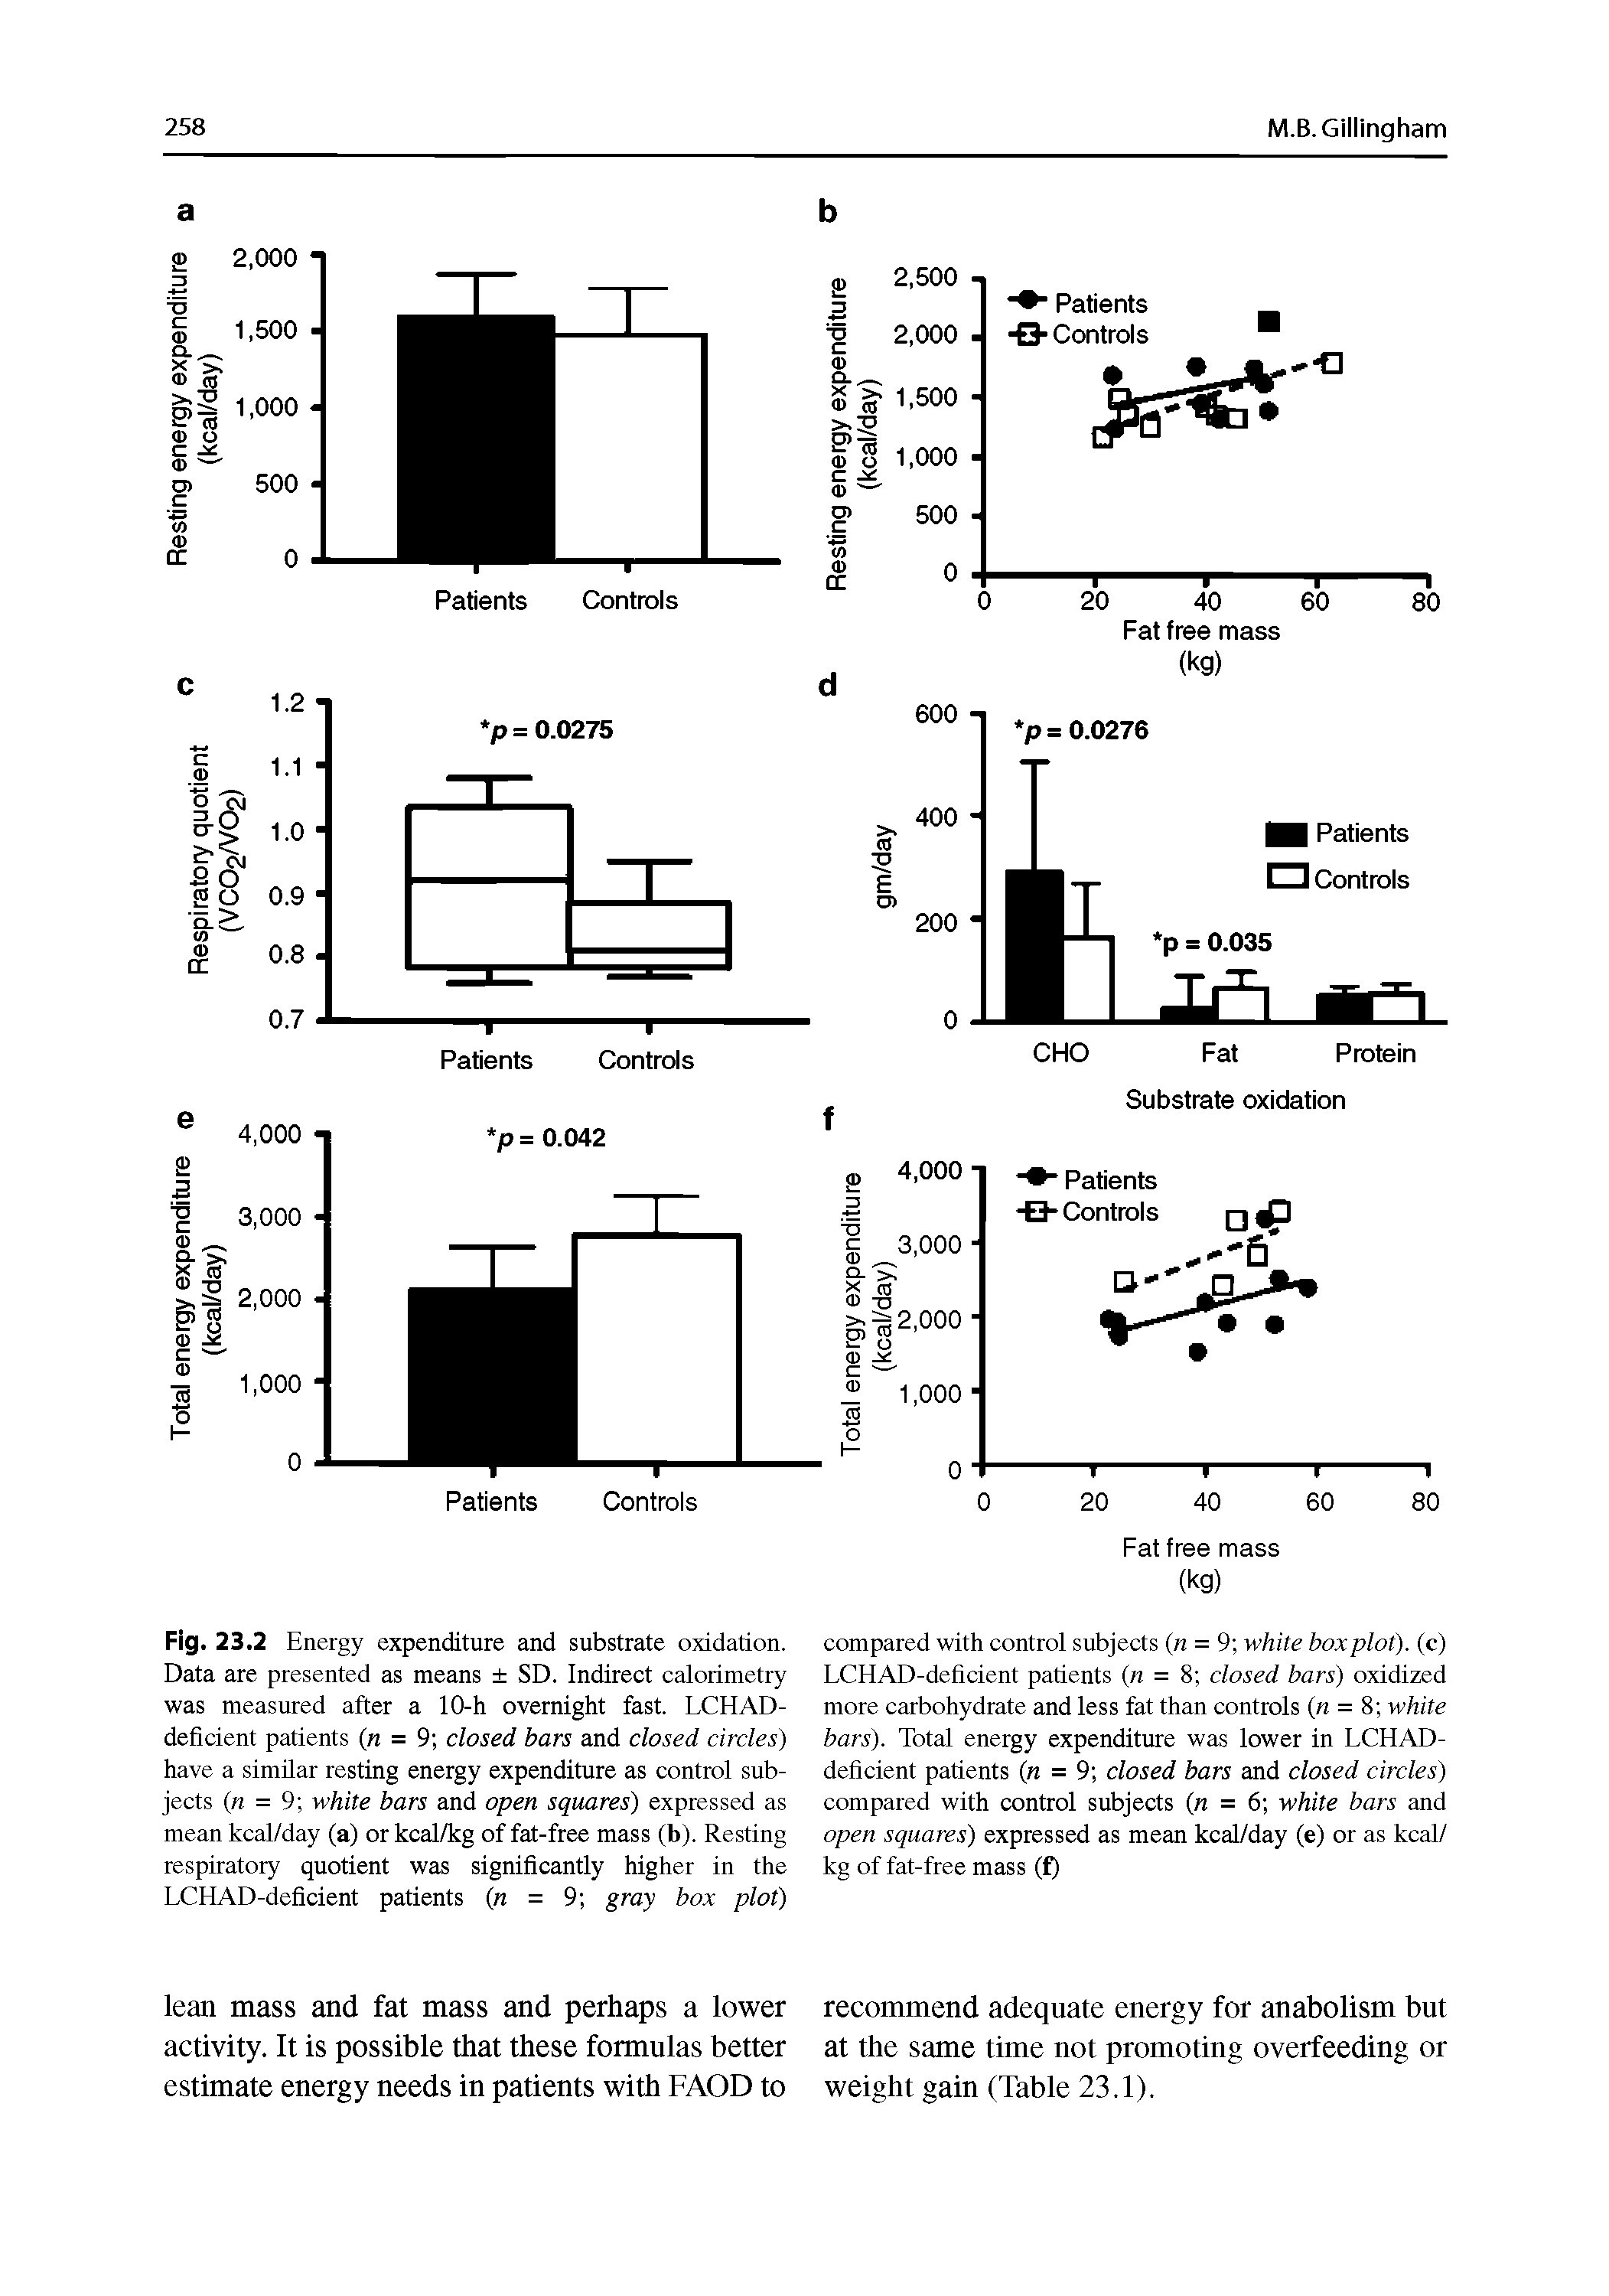 Fig. 23.2 Energy expenditure and substrate oxidation. Data are presented as means SD. Indirect calorimetry was measured after a 10-h overnight fast. LCHAD-defident patients (n = 9 closed bars and closed circles) have a similar resting energy expenditure as control subjects (n = 9 white bars and open squares) expressed as mean kcal/day (a) or kcal/kg of fat-free mass (b). Resting respiratory quotient was significantly higher in the LCHAD-deficient patients (n = 9 gray box plot)...